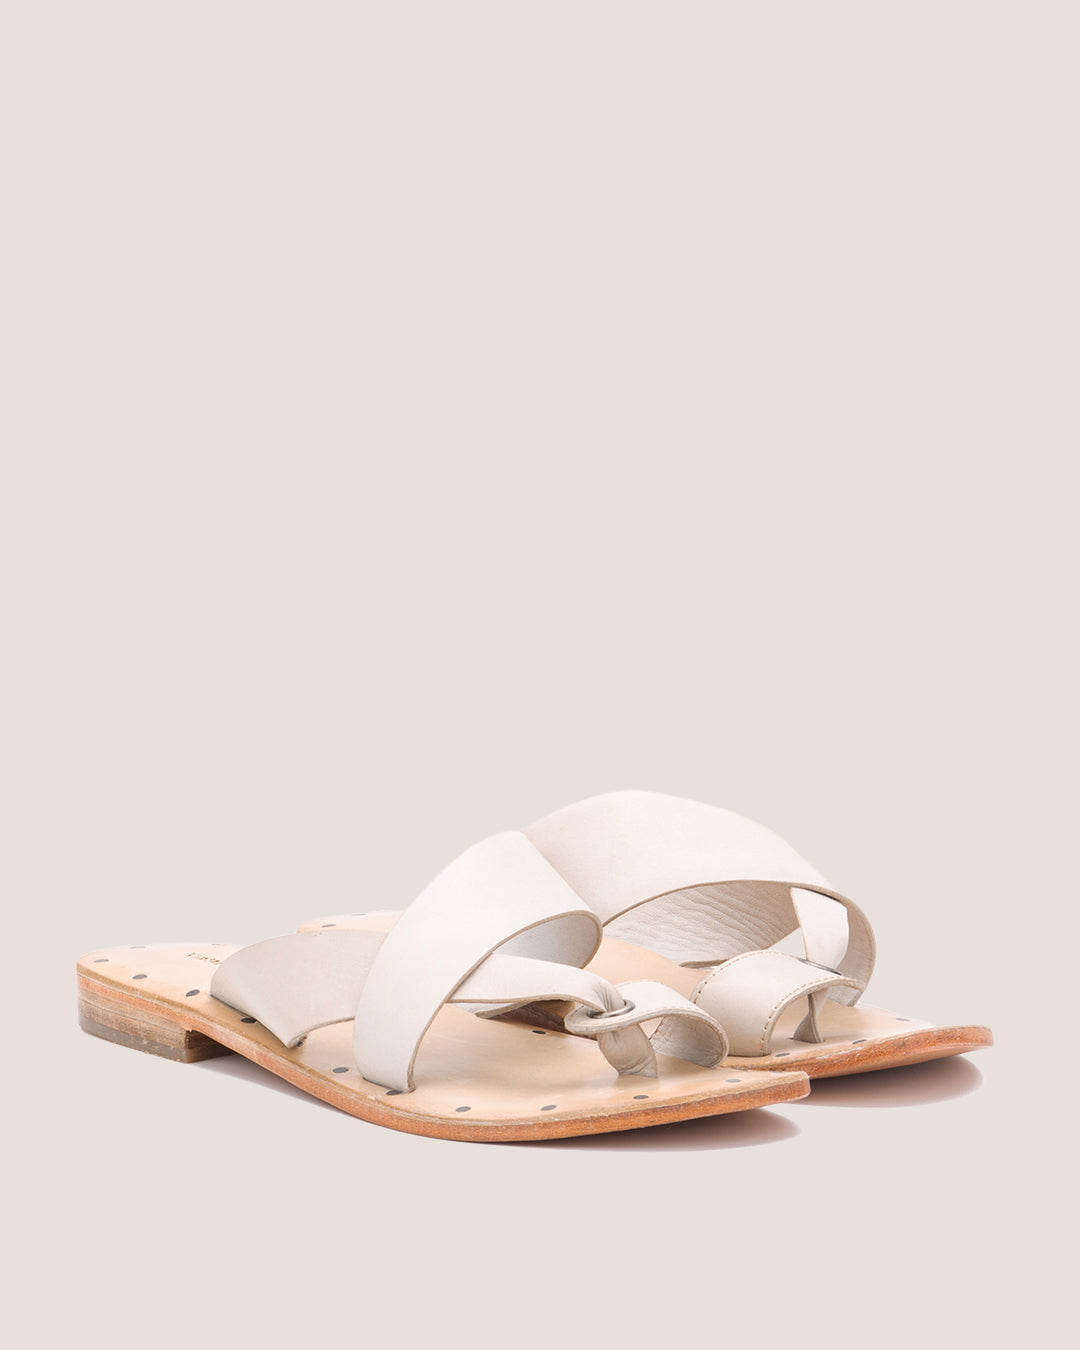 All Women's Sandals – Vintage Foundry Co